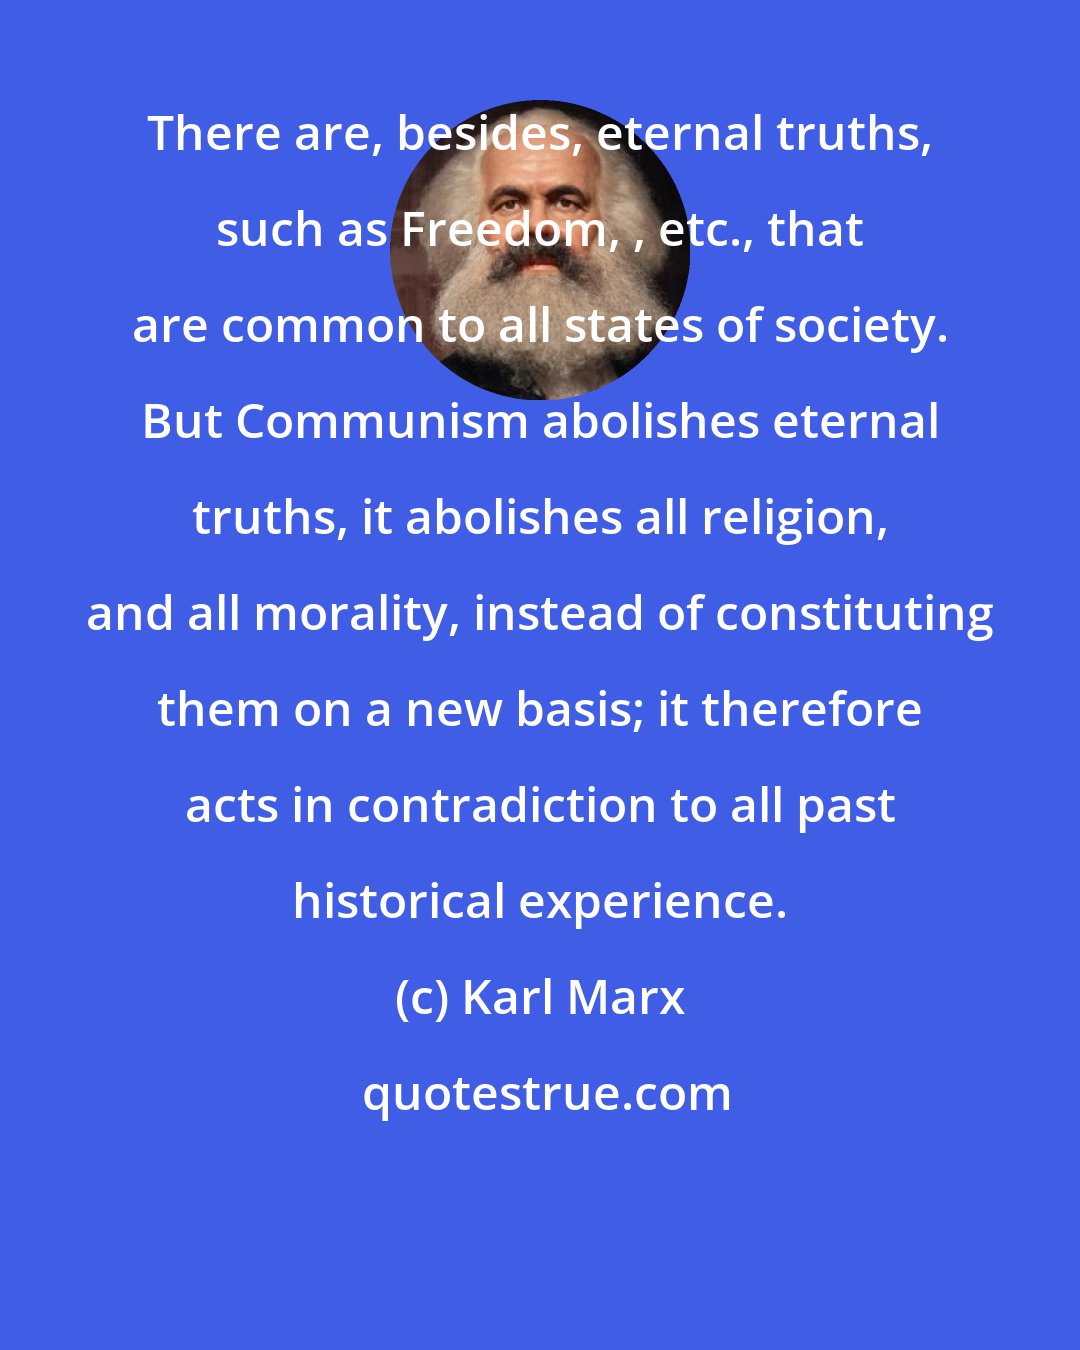 Karl Marx: There are, besides, eternal truths, such as Freedom, , etc., that are common to all states of society. But Communism abolishes eternal truths, it abolishes all religion, and all morality, instead of constituting them on a new basis; it therefore acts in contradiction to all past historical experience.